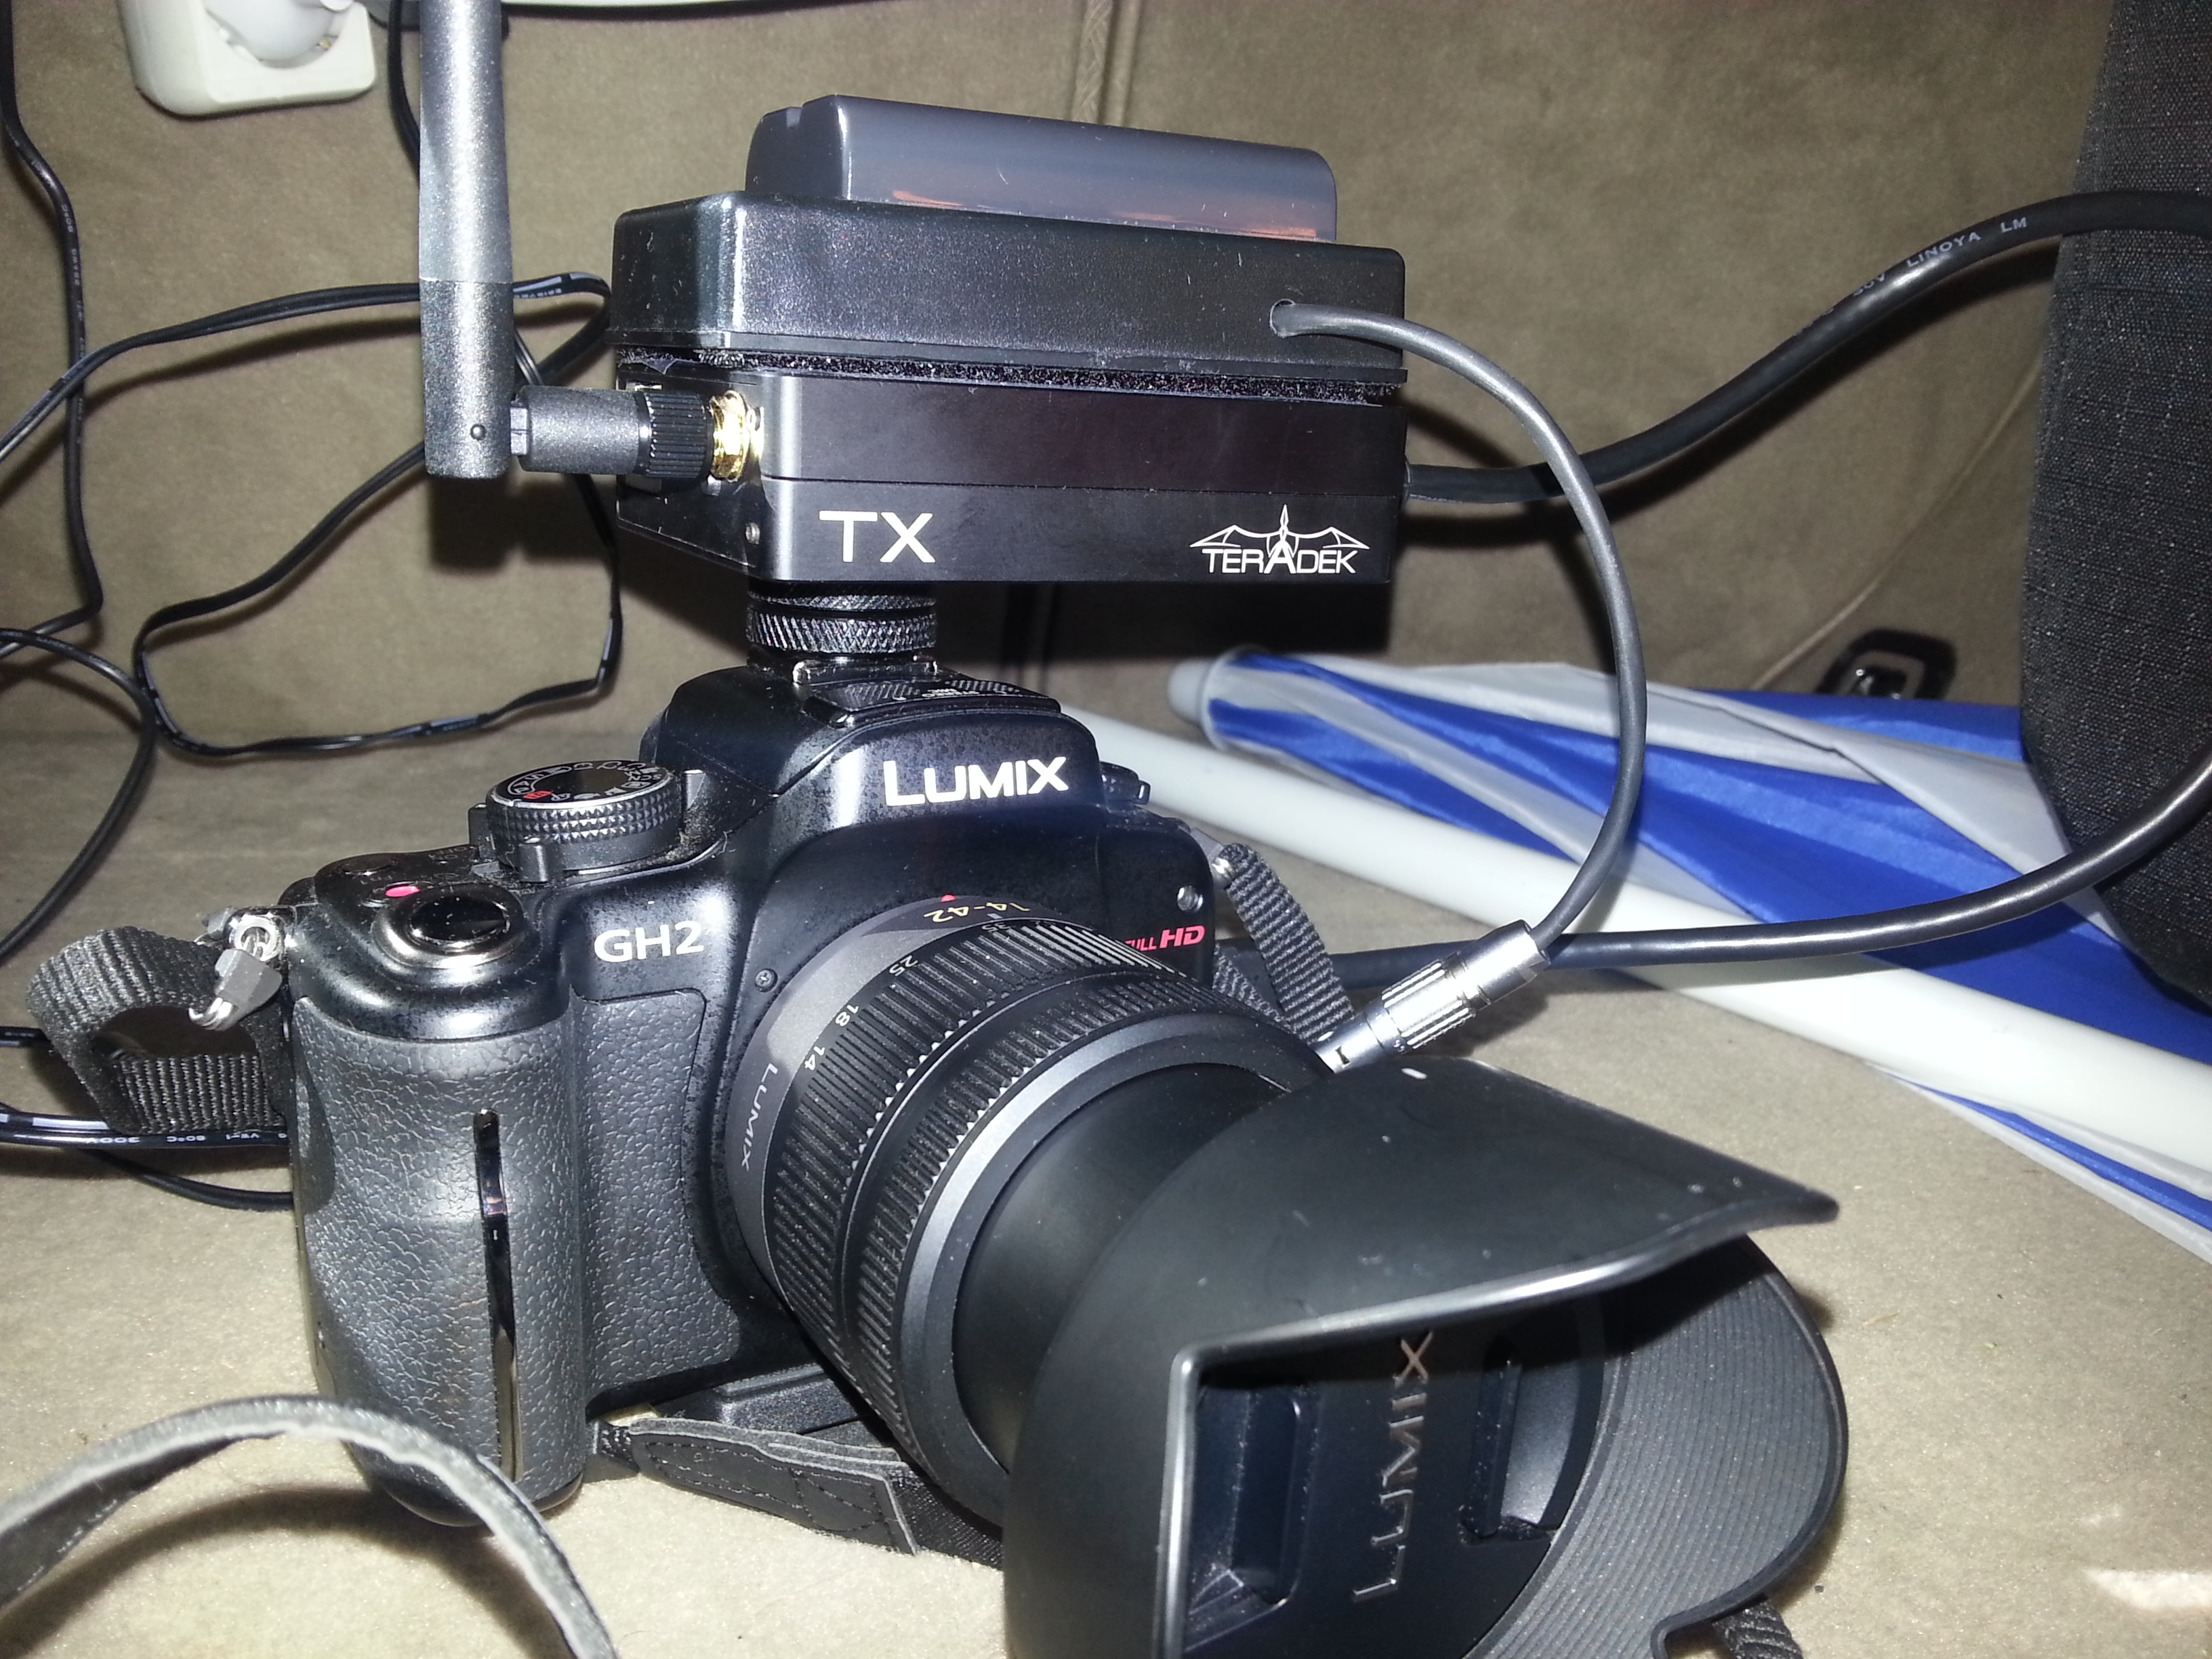 Teradek Cube 220 attached to a Panasonic Lumix Gh2 with a Sony Battery